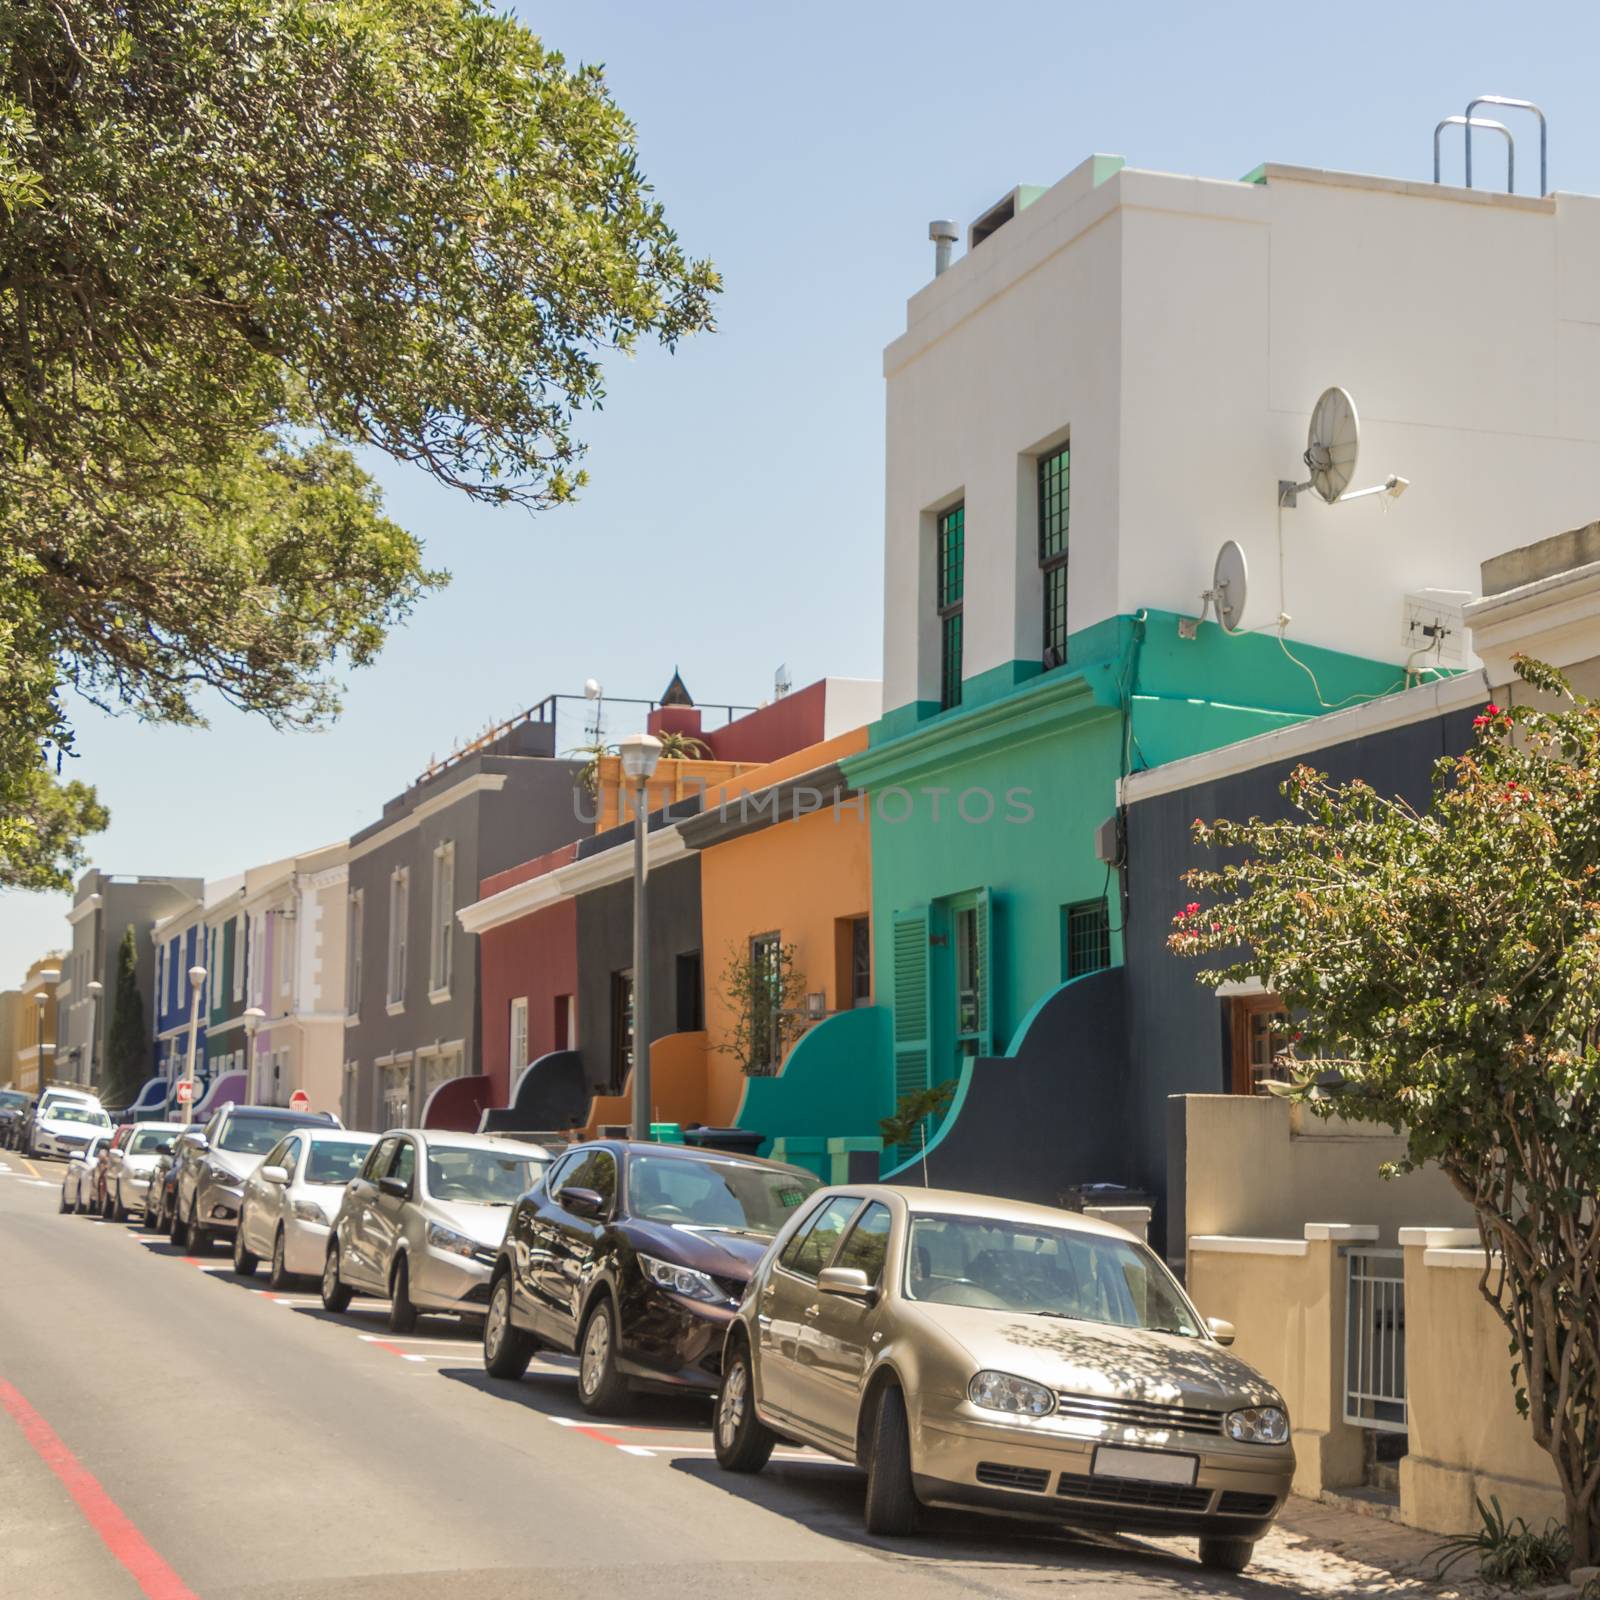 Many colorful houses in the Bo Kaap district in Cape Town, South Africa.